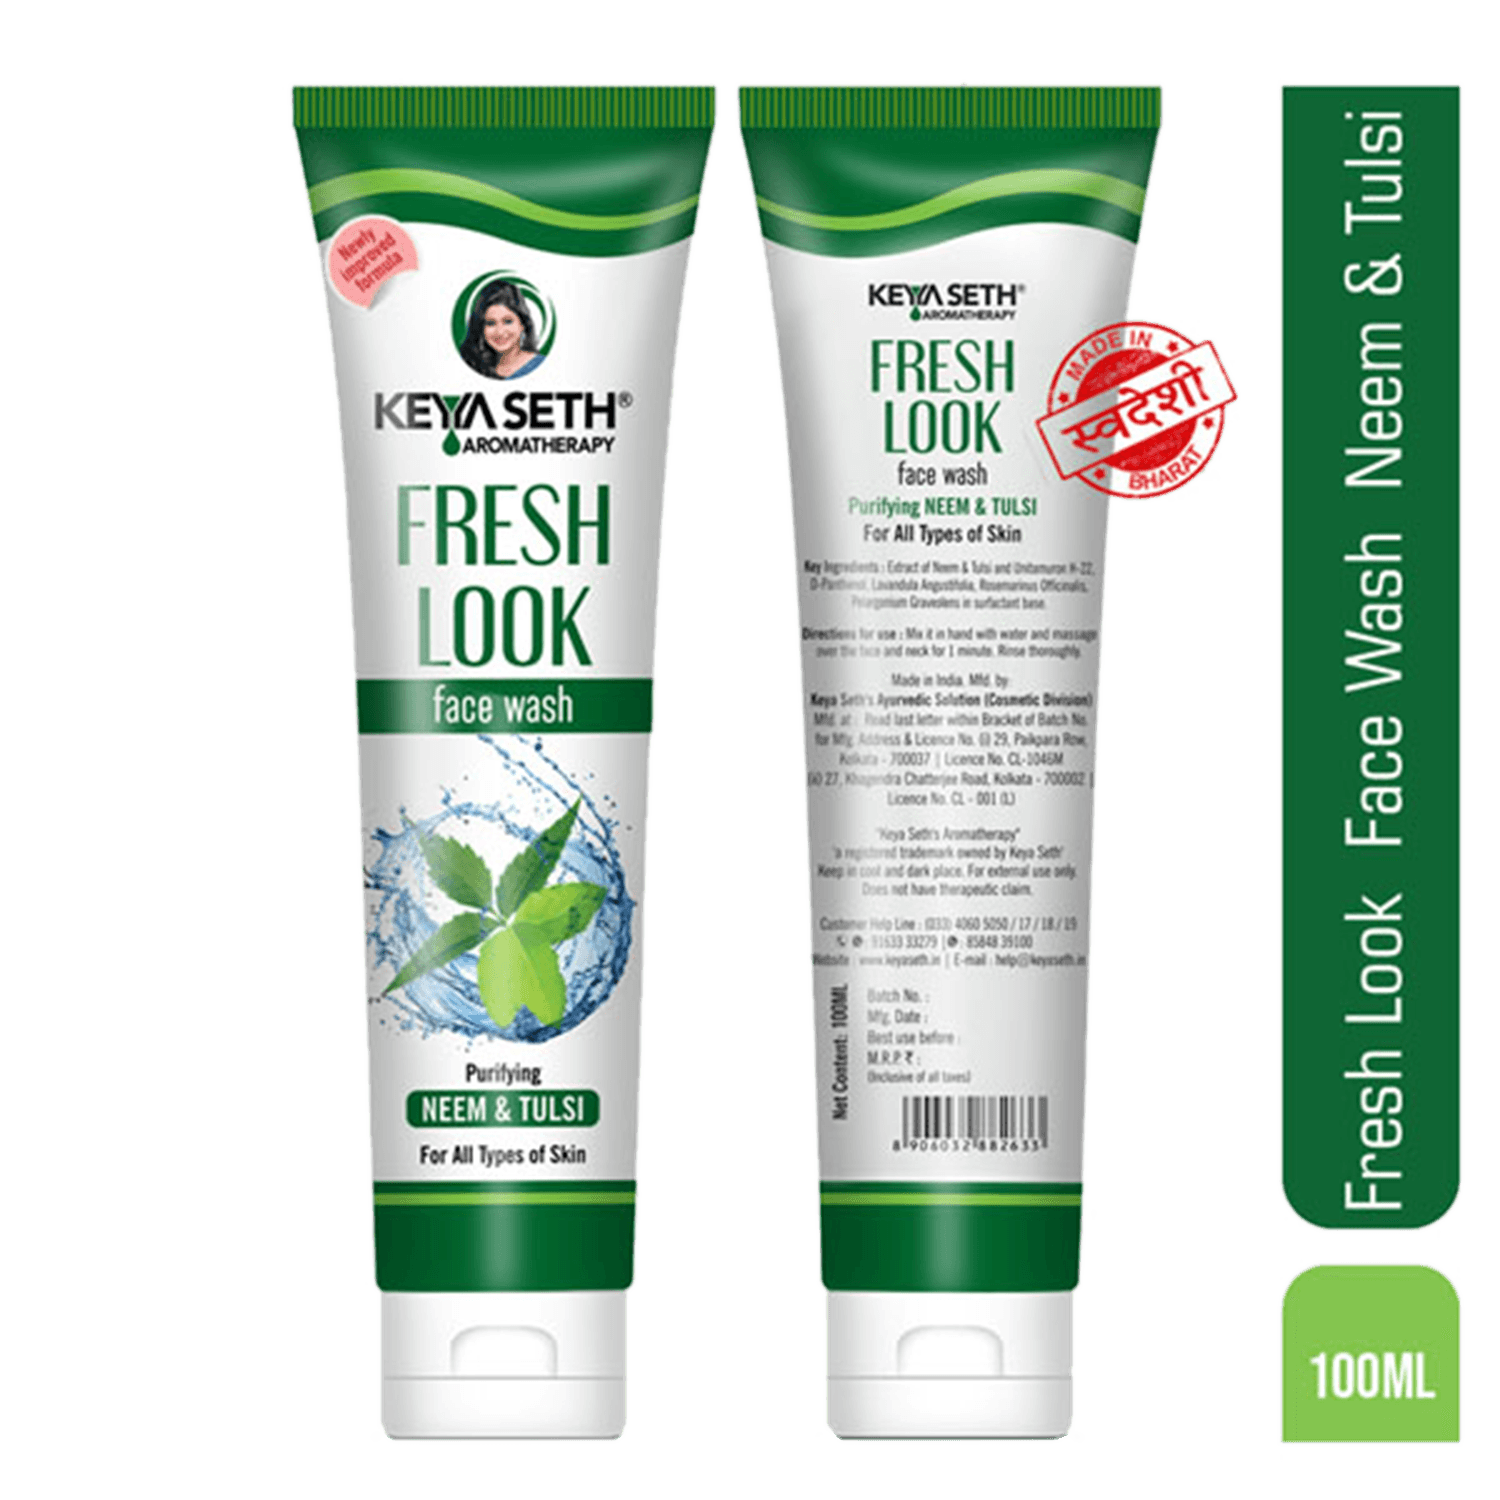 Keya Seth Aromatherapy | Keya Seth Aromatherapy Fresh Look Face Wash (100ml)